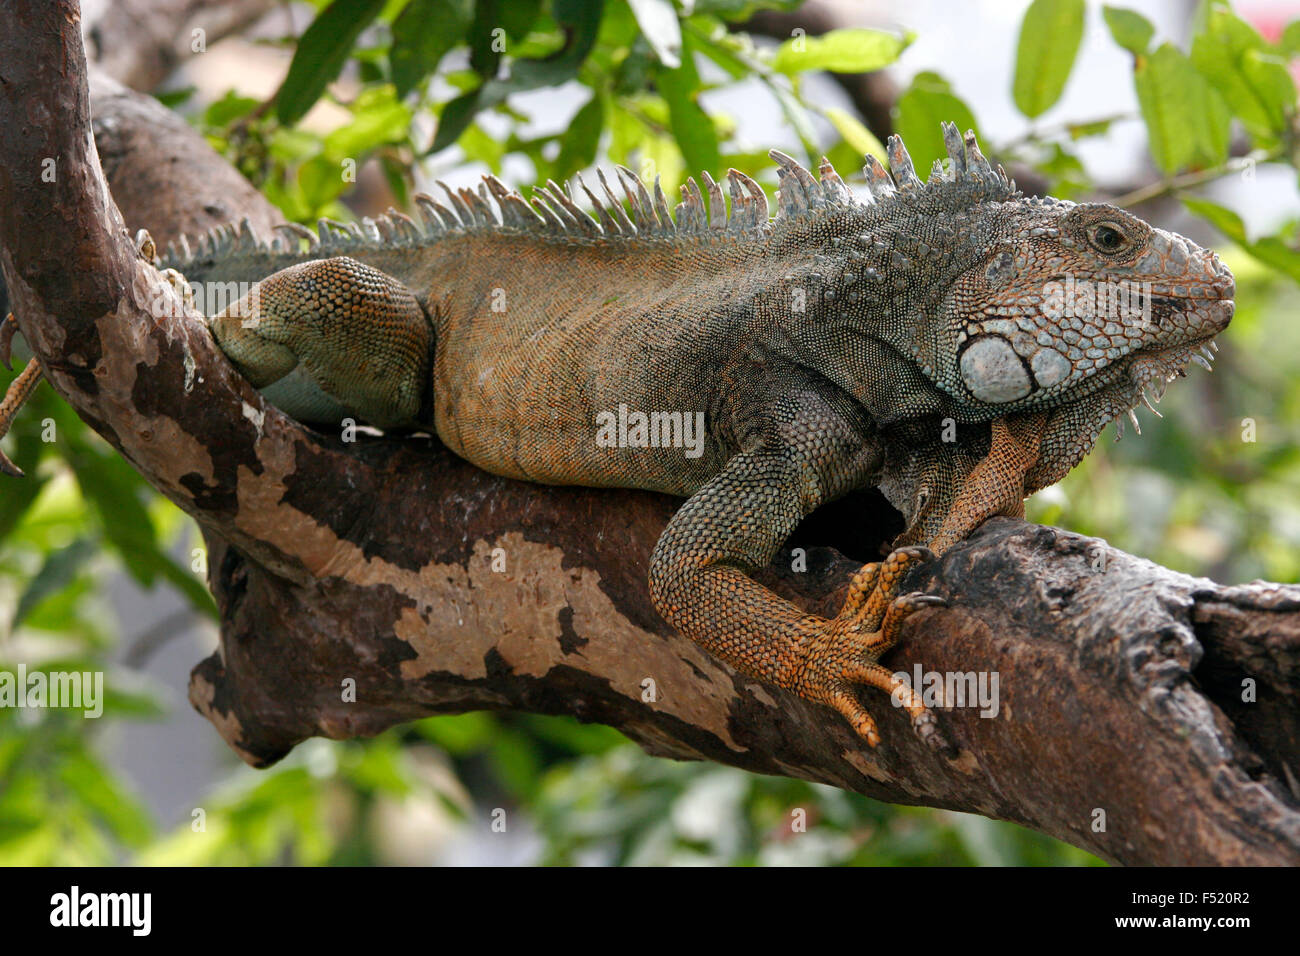 Iguana on the branch of the tree in Parque Bolivar, Guayaquil, Ecuador, South America Stock Photo